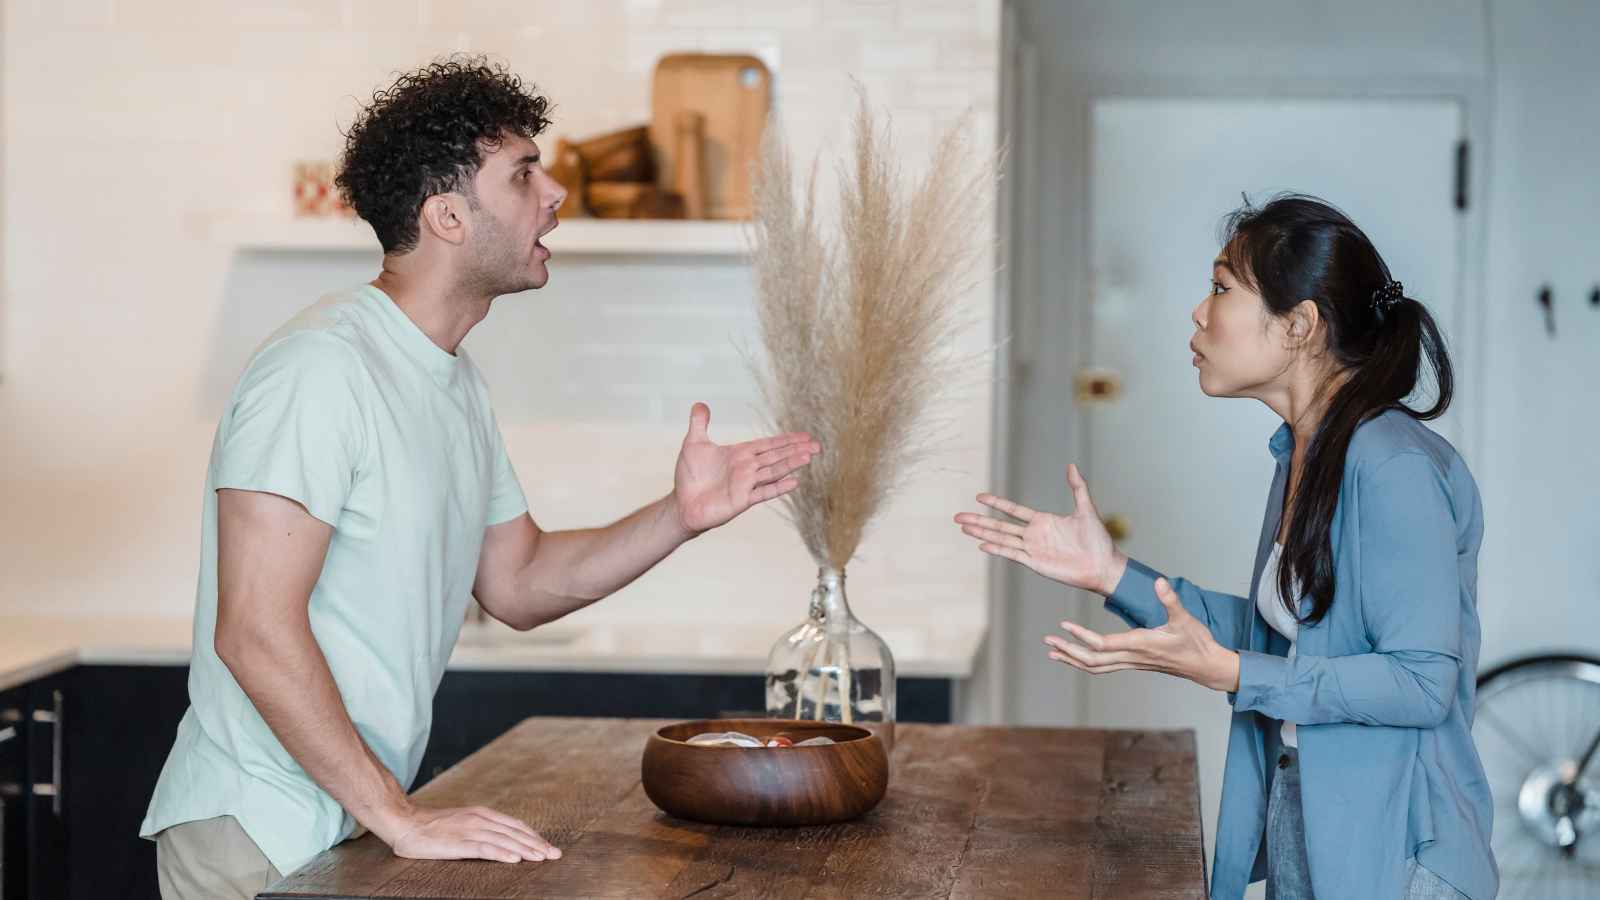 Boyfriend's Outrageous Excuse for Not Sharing Household Chores Sparks Girlfriend's Fury: Can They Salvage Their Relationship with a Fair Compromise?